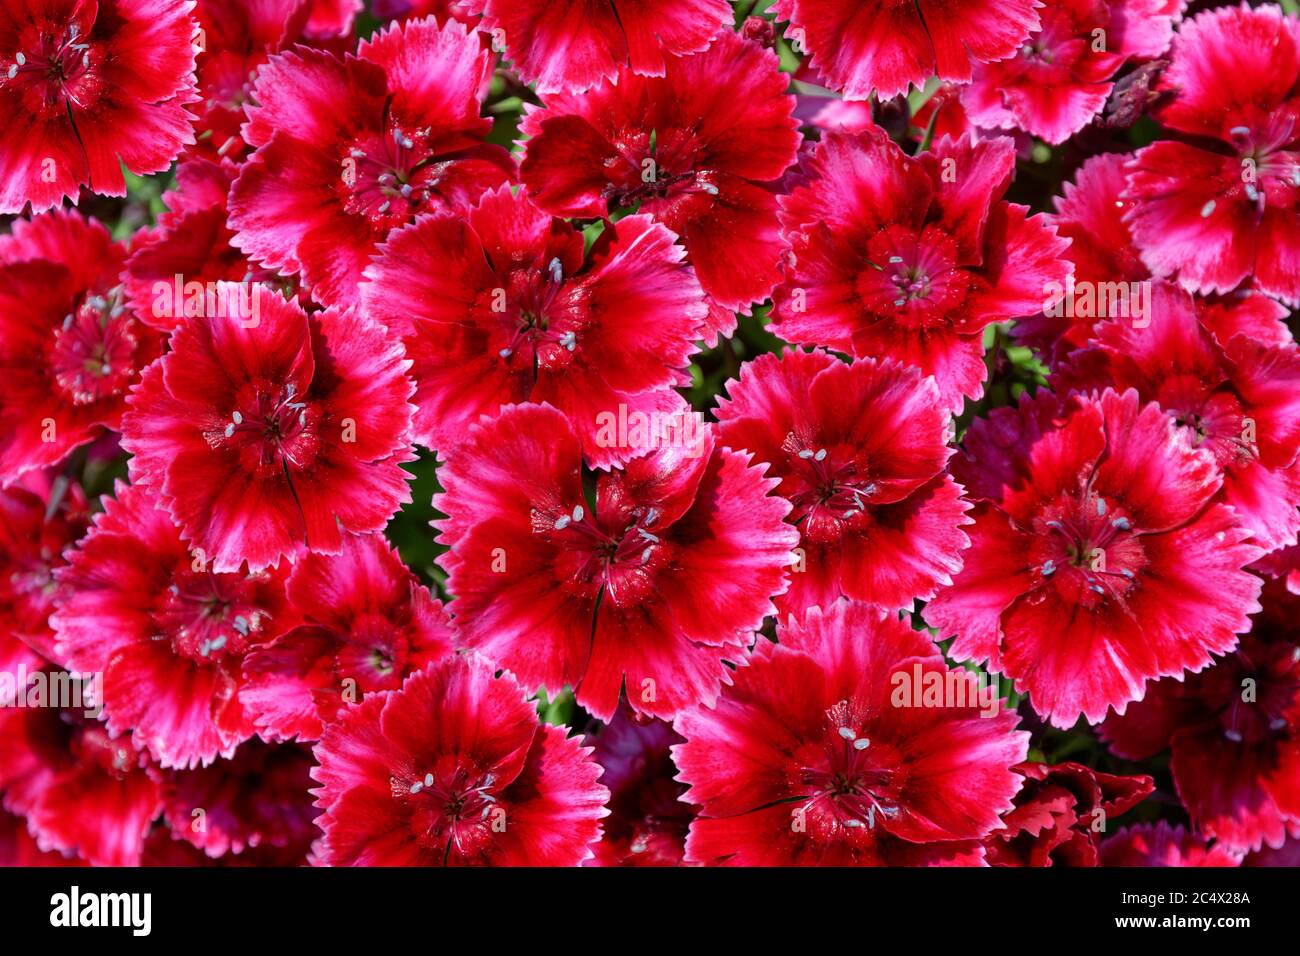 Pinks flower group in classification Dianthus. Stock Photo